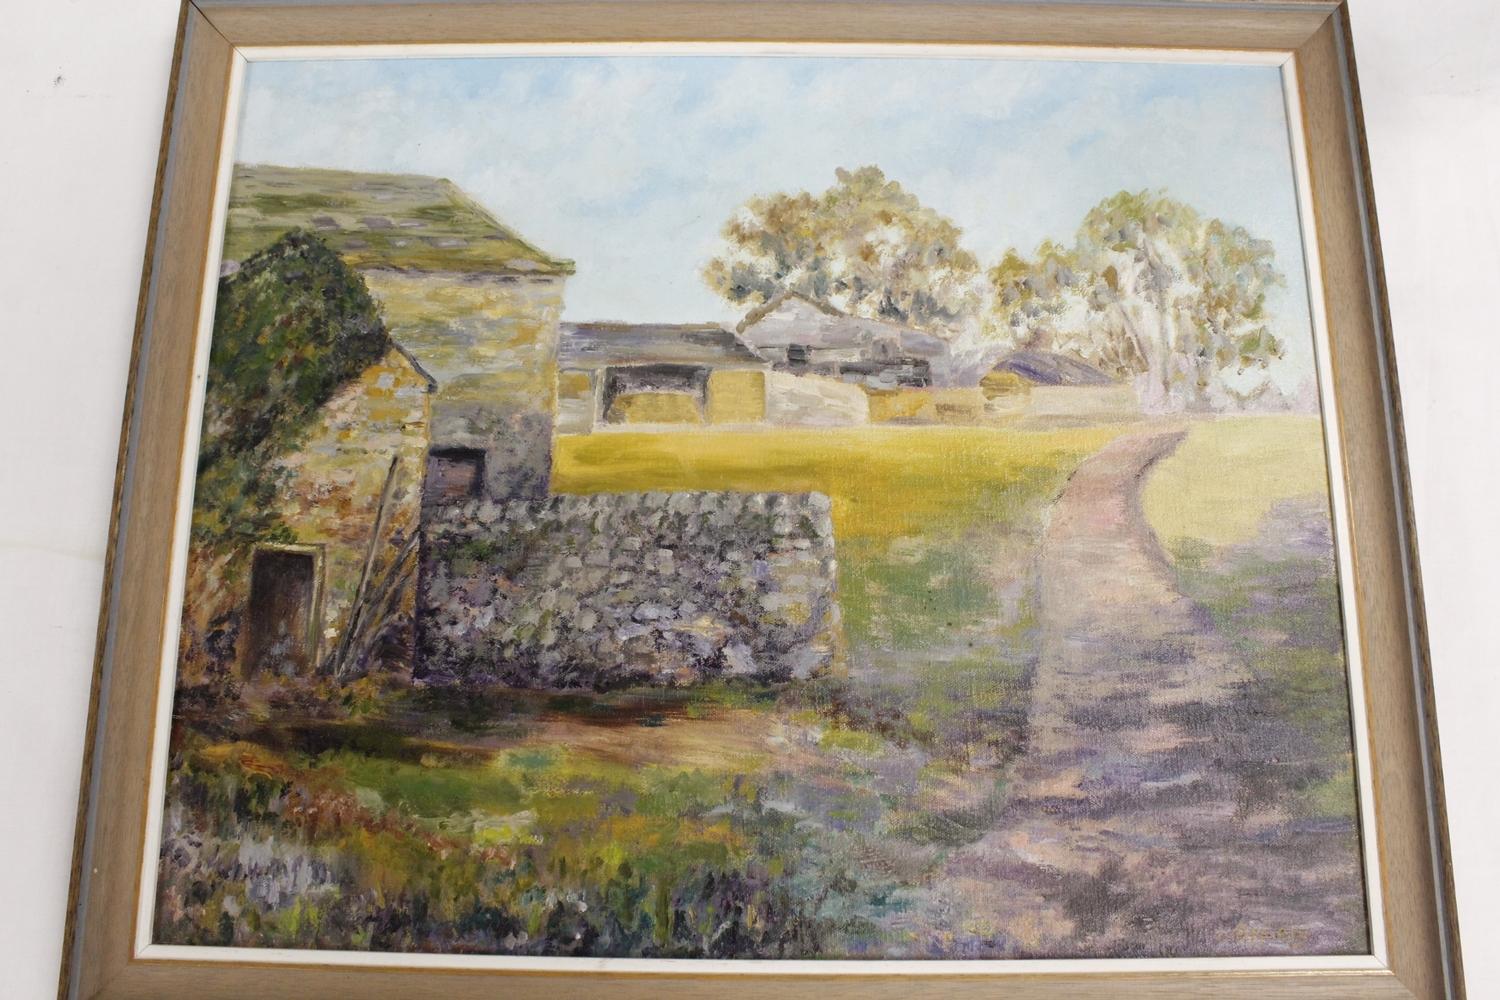 J Appleby.Dukesfield Farm, Northumberland.Oil on canvas, 45 x 55cm. Signed. - Image 2 of 3